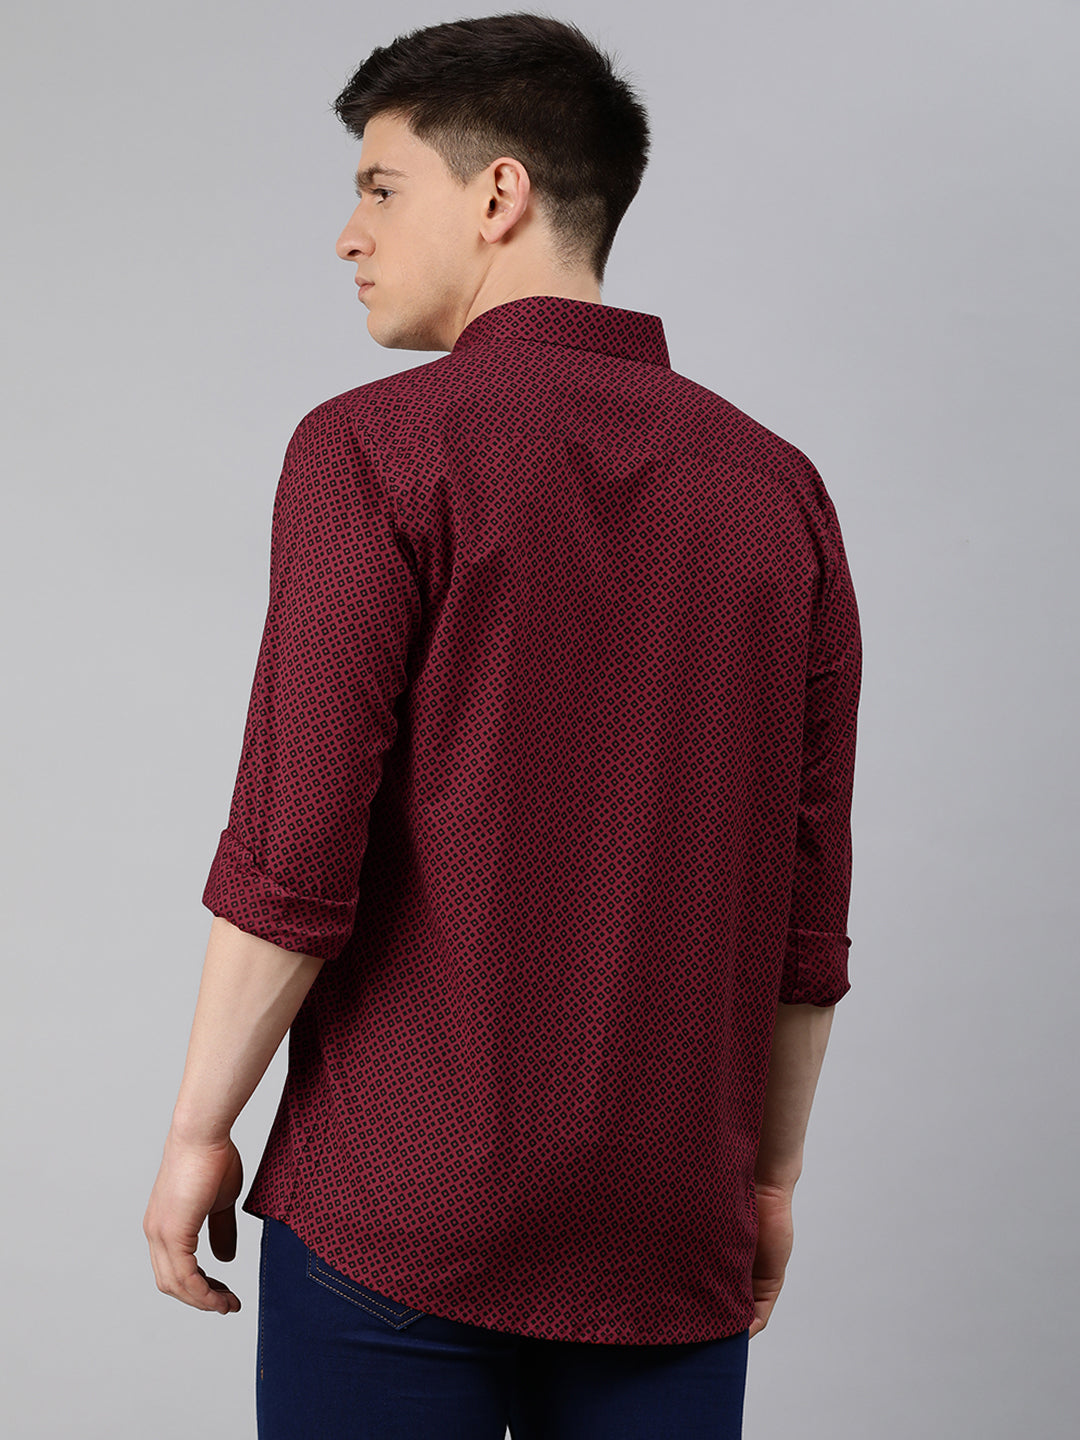 Maroon Cotton Full Sleeves Shirts For Men-MMF028 - NOZ2TOZ